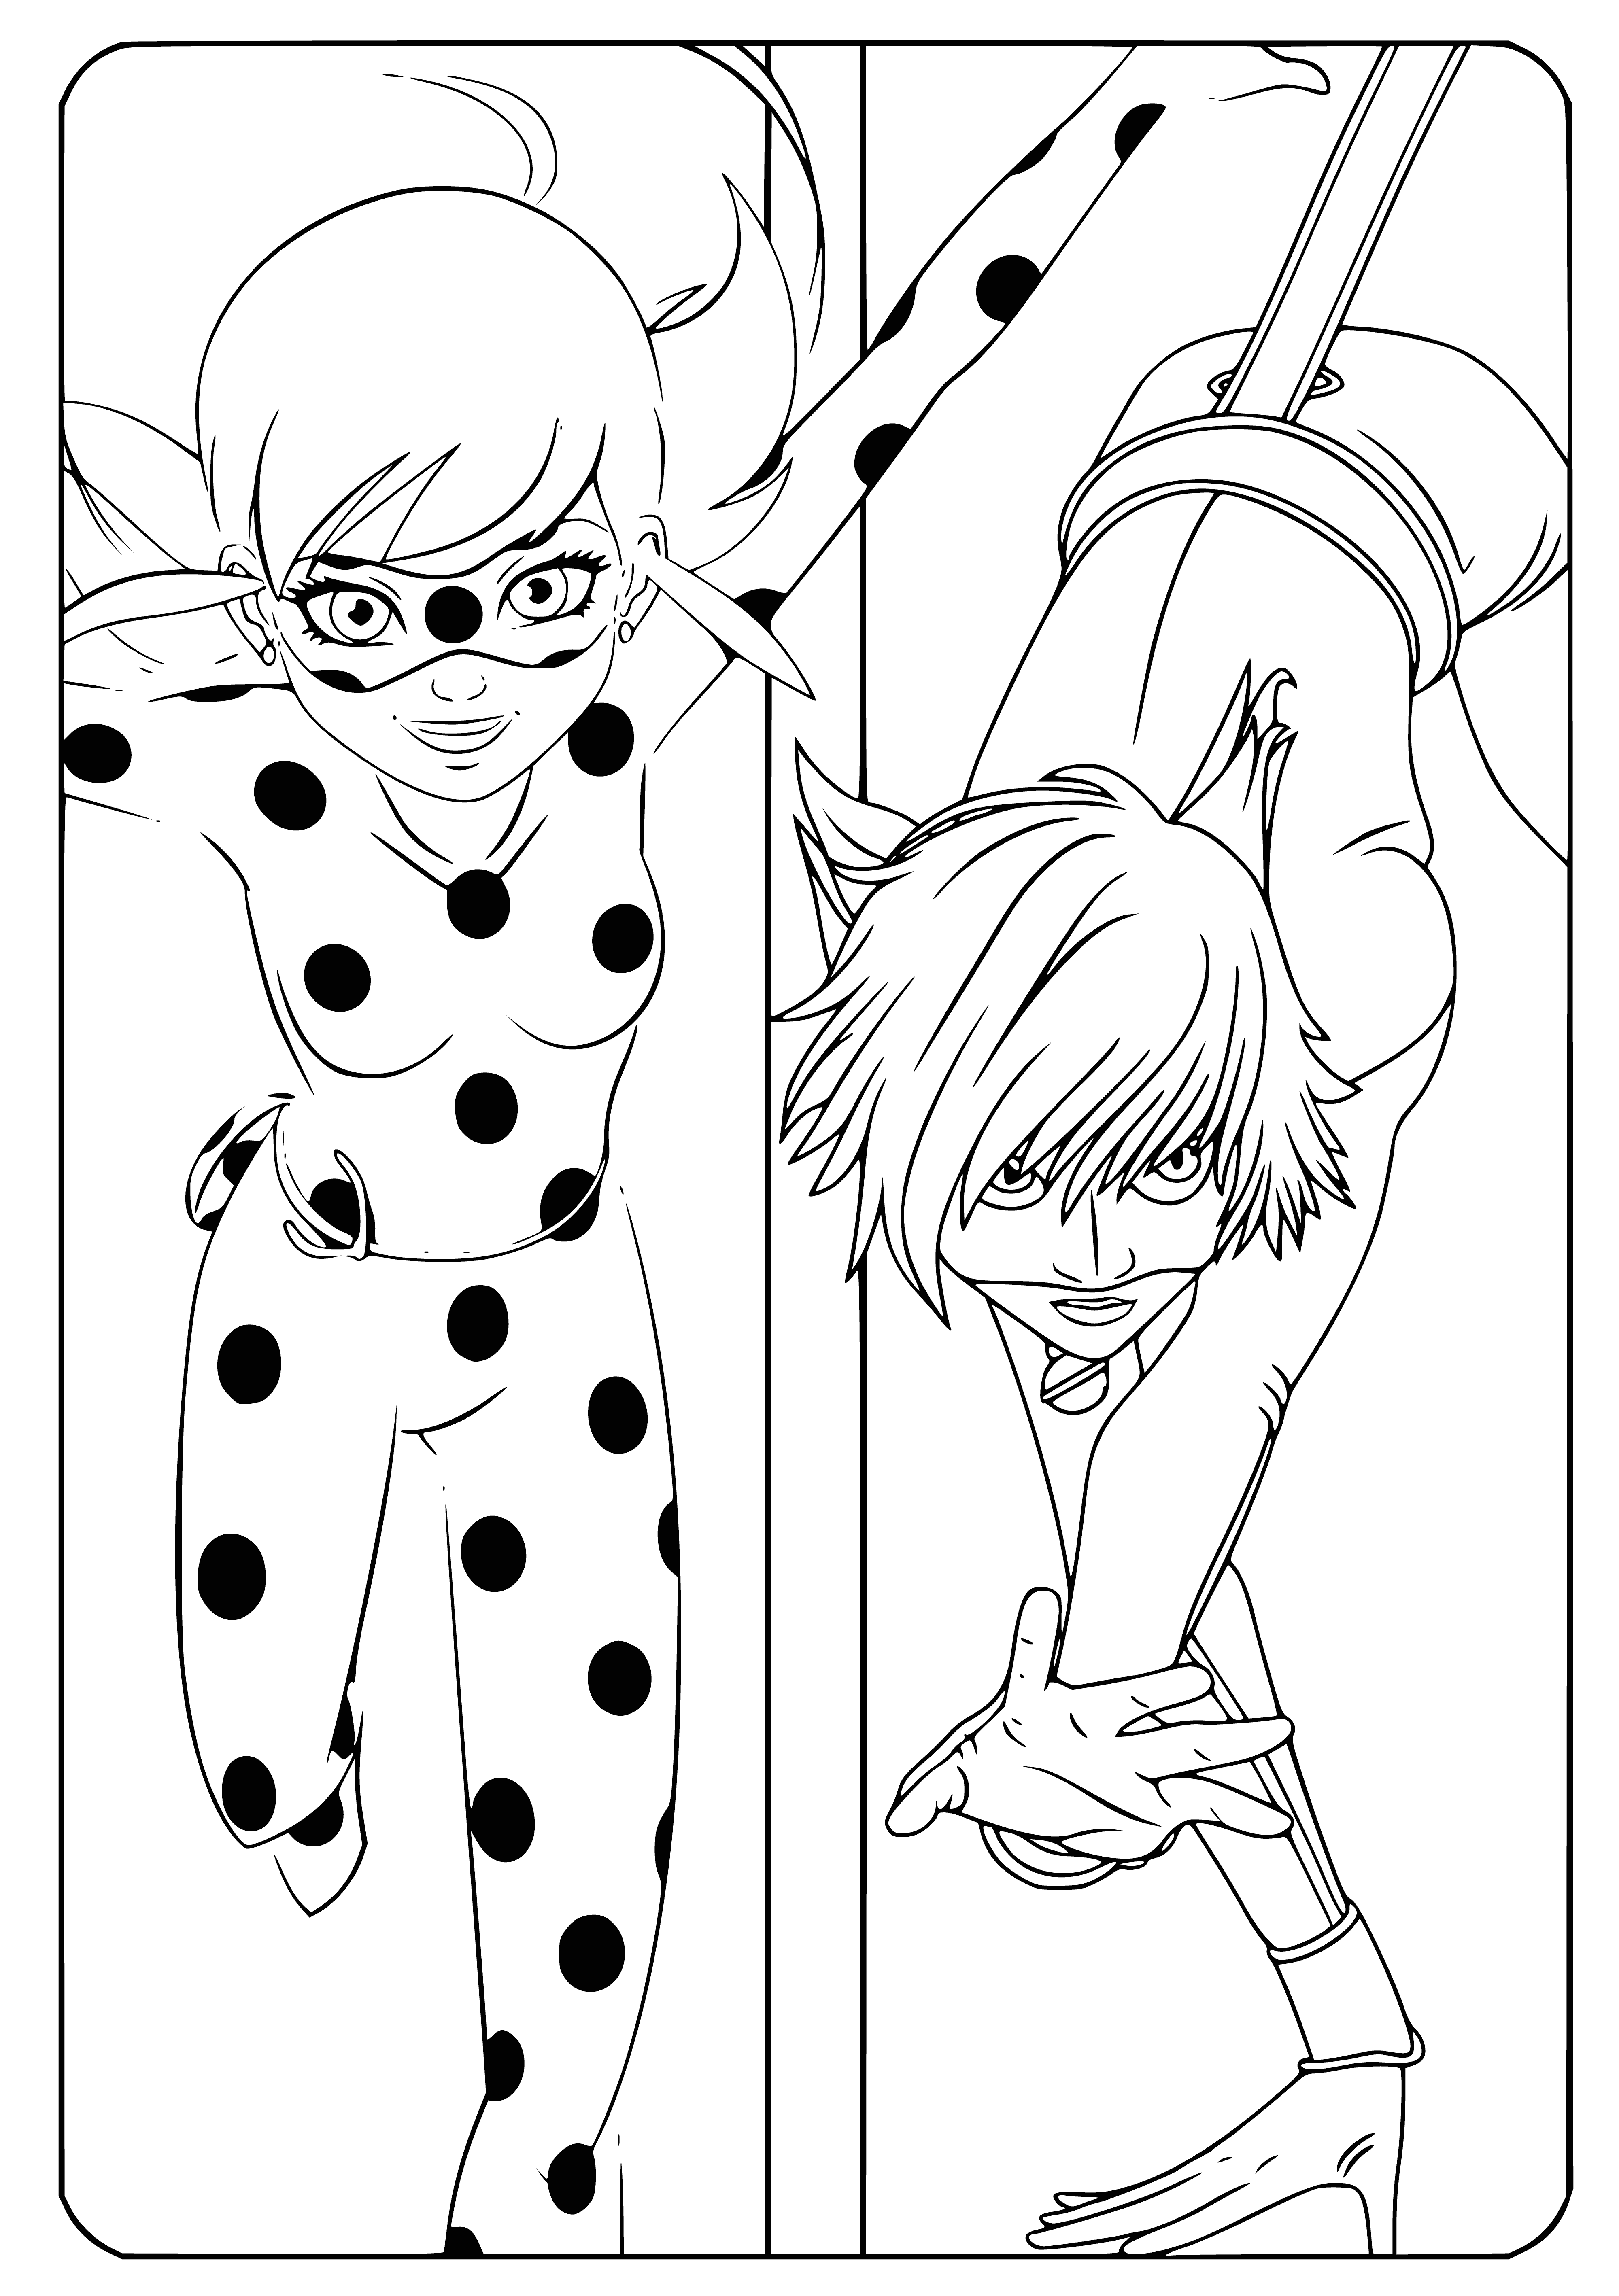 Lady Bug and Super Cat coloring page